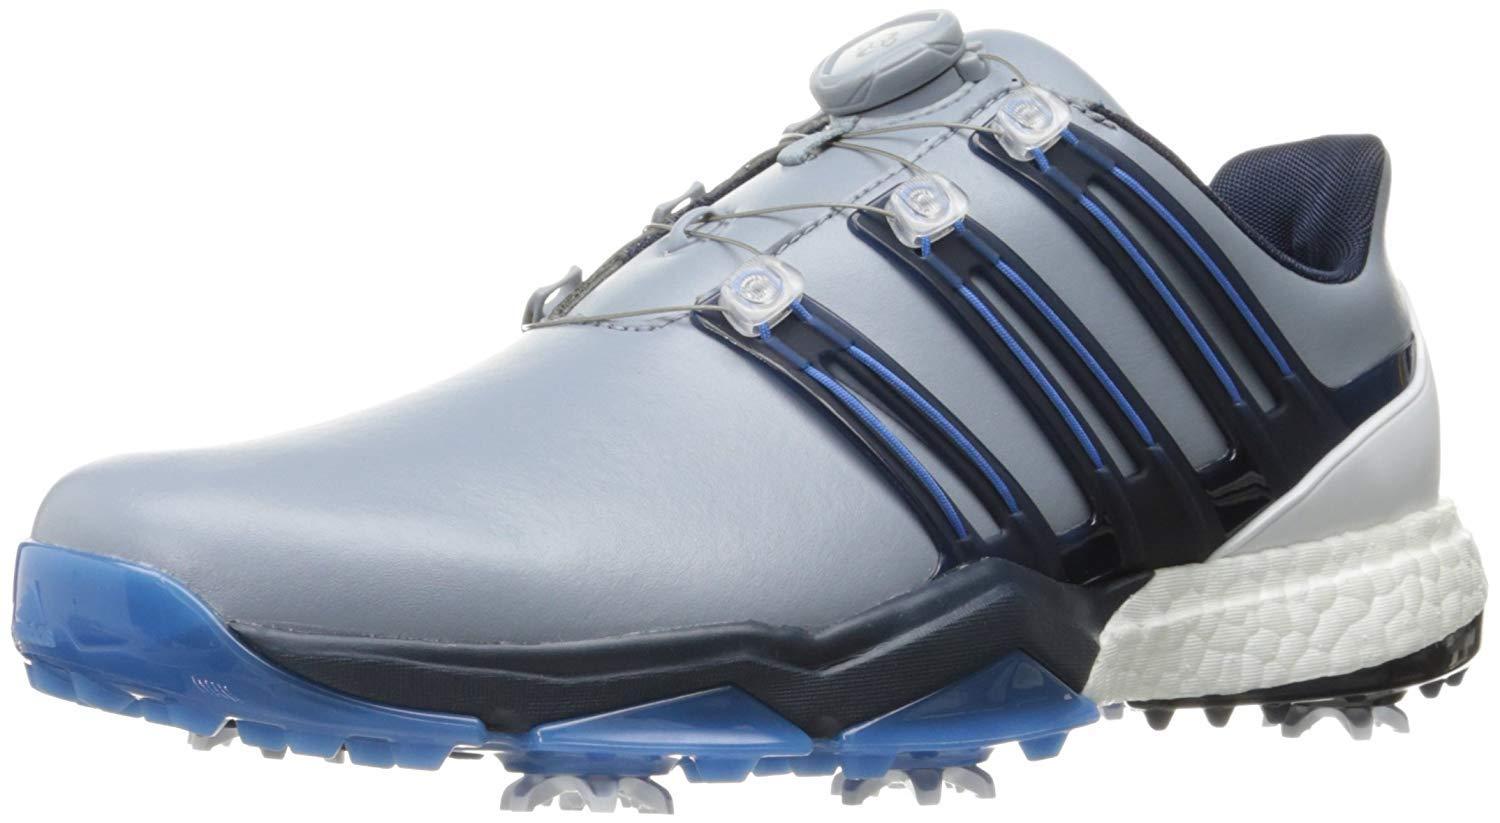 Markeret Vice Demokratisk parti adidas Leather Powerband Boa Boost Golf Shoes,grey,9 M Us in Blue for Men -  Lyst